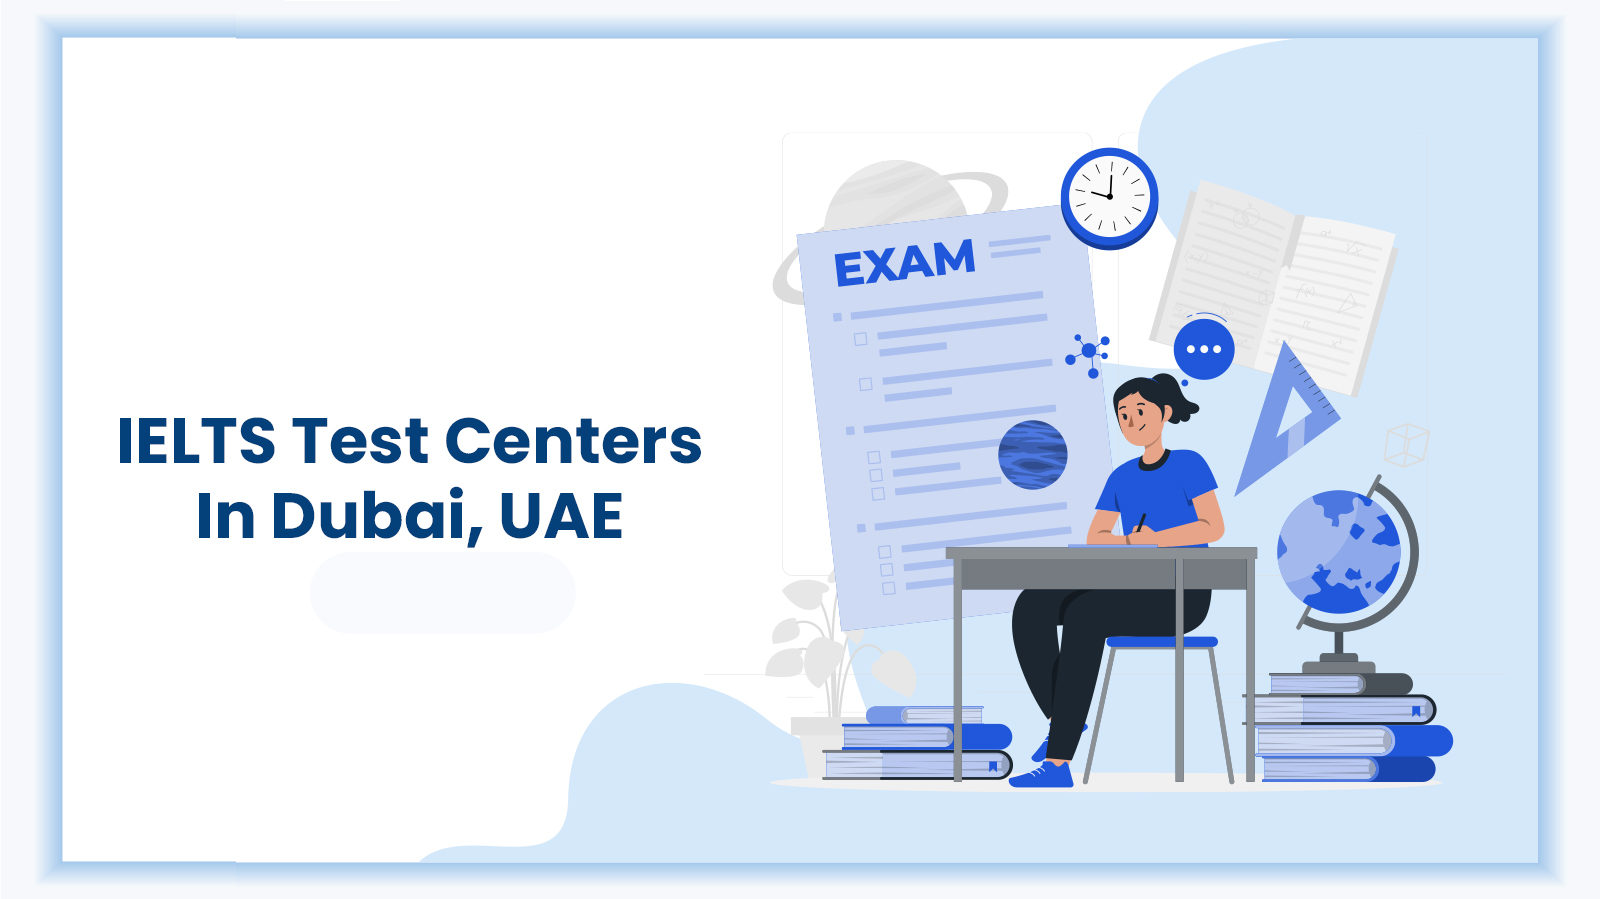 Display image for our Blog - IELTS Test Centers in Dubai